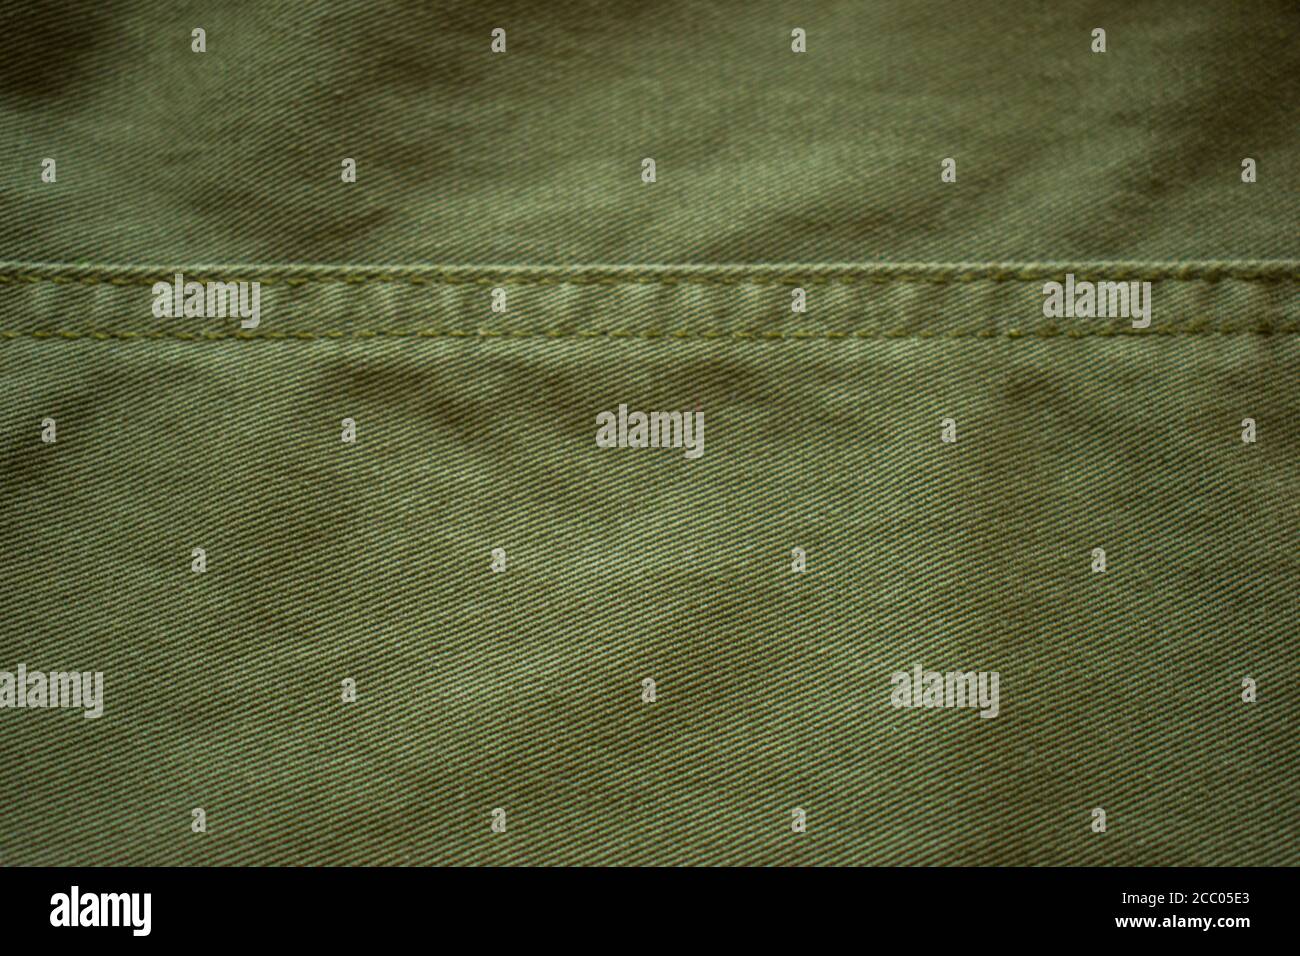 Background of green grunge military fabric, cloth with textures. Stock Photo